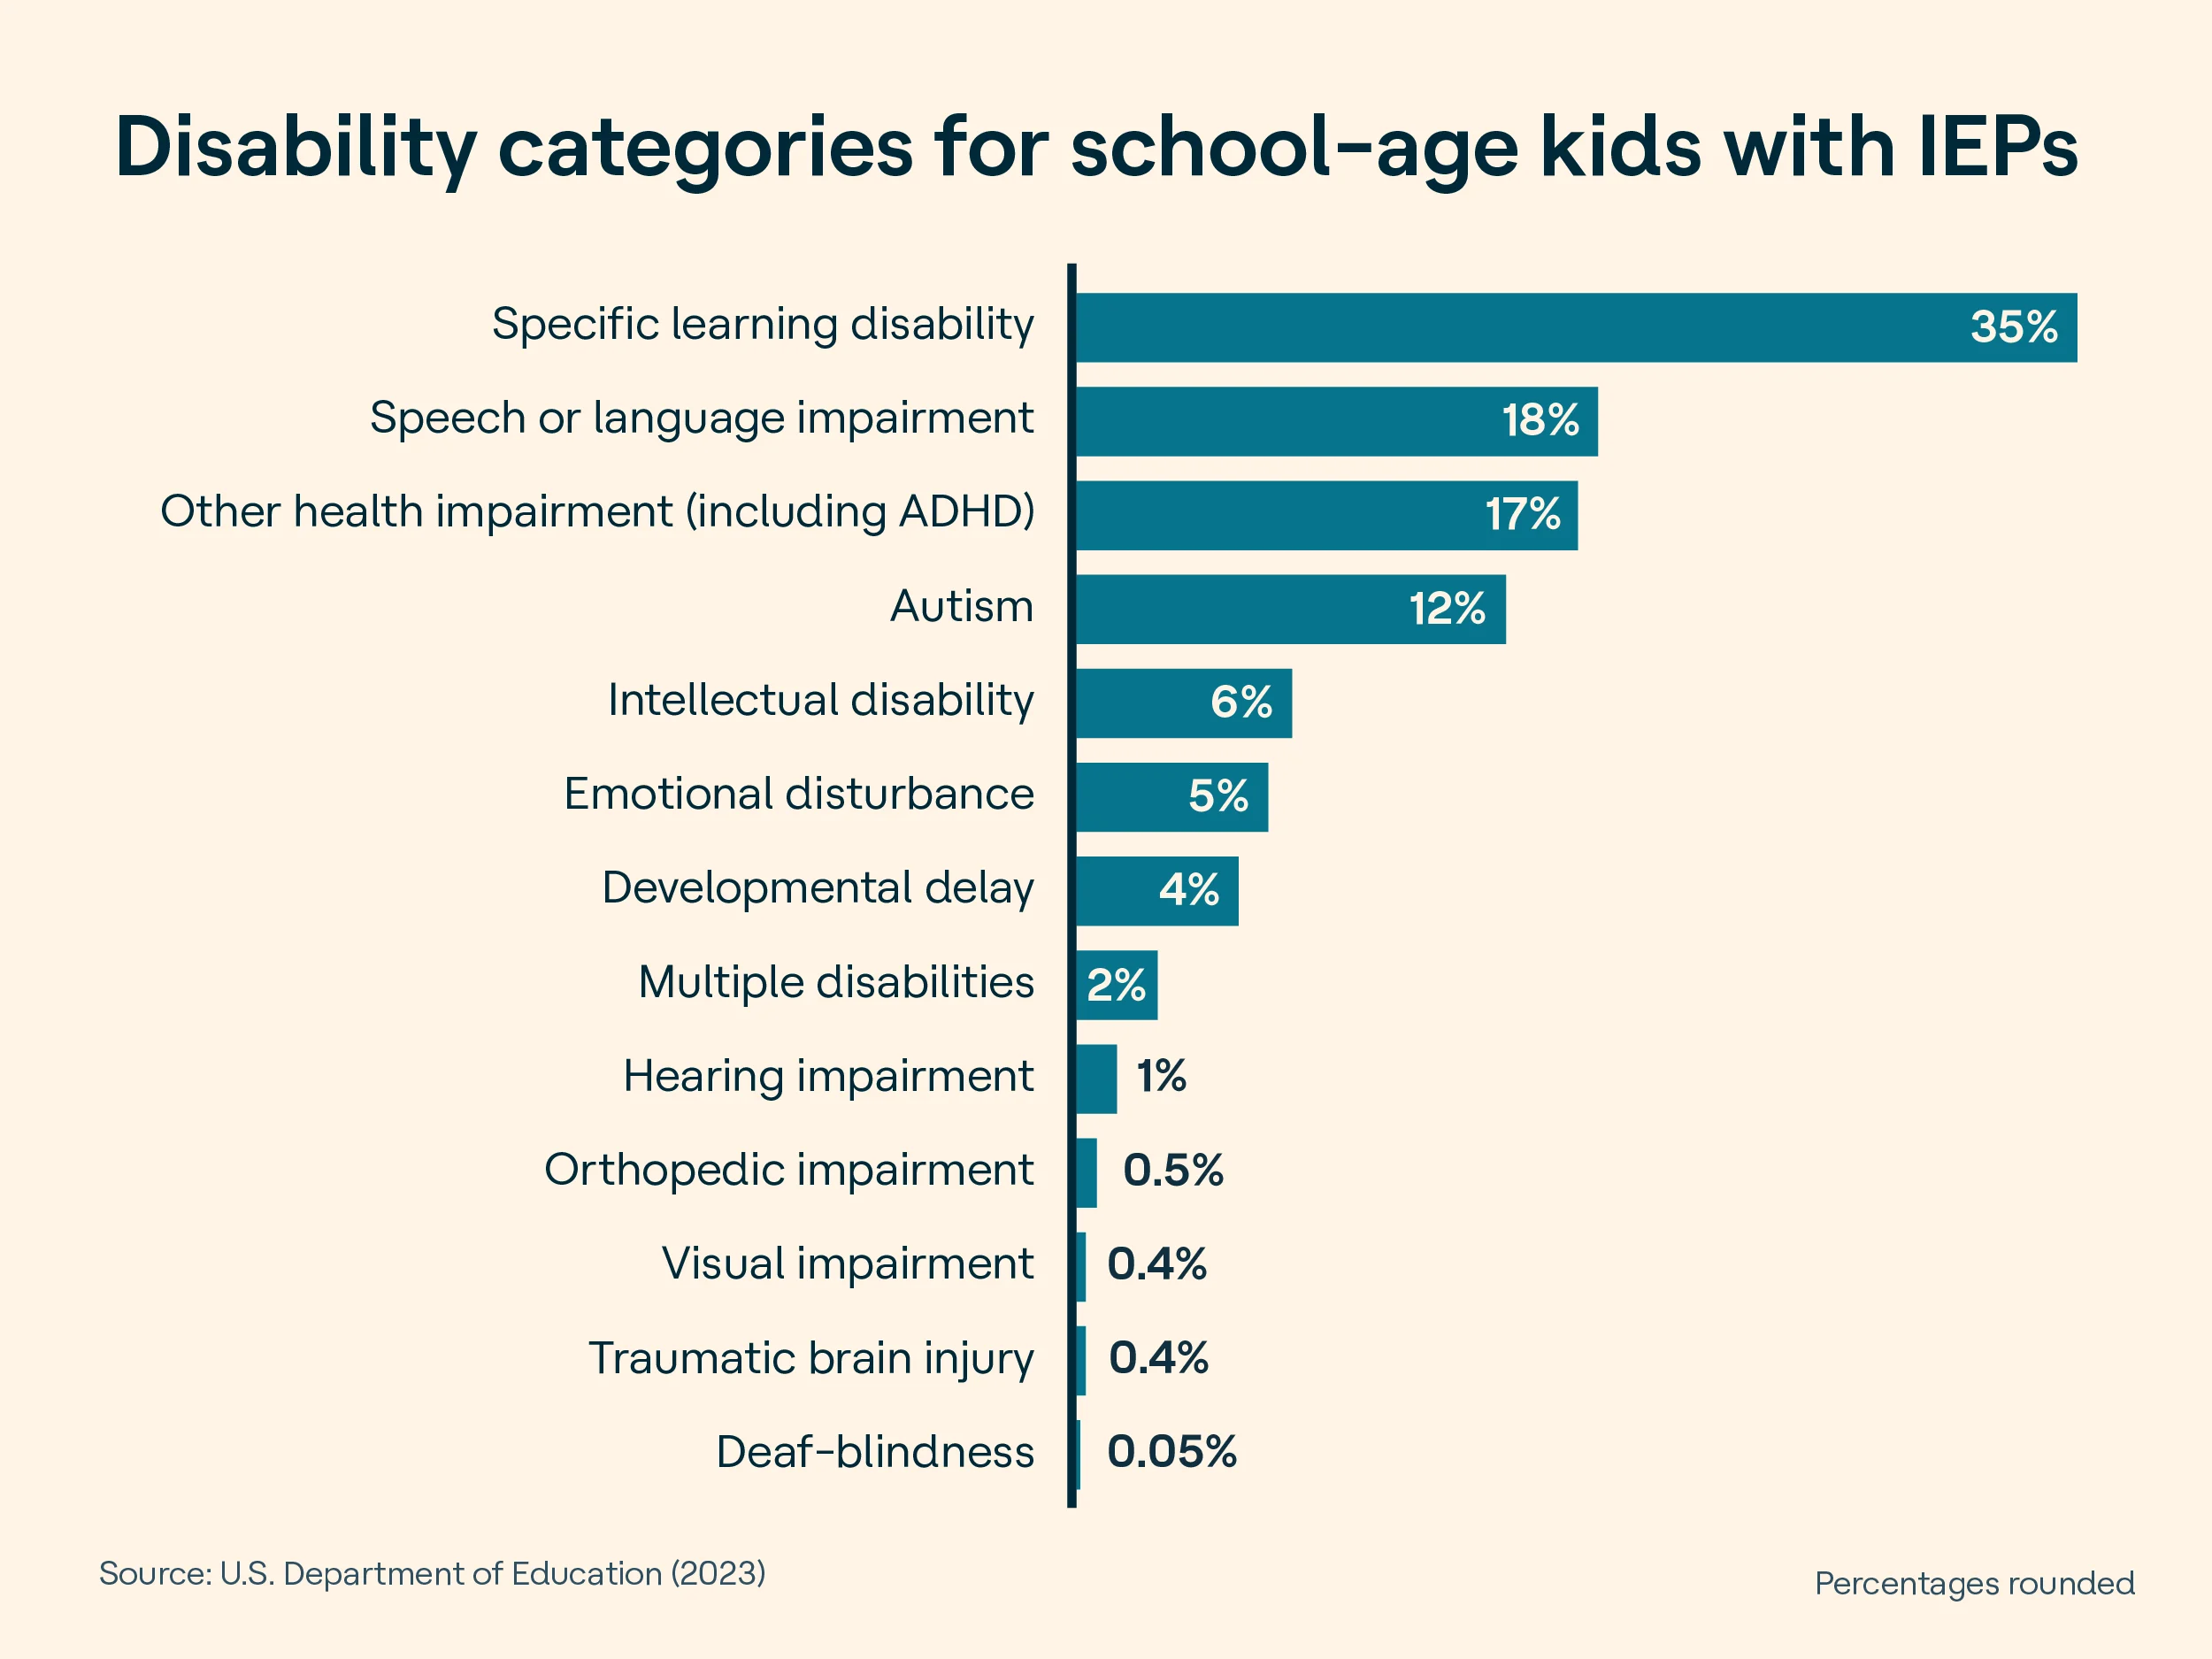 Horizontal bar graph showing, in descending order, what percentage of school-age kids with IEPs are in each of the 13 disability categories. From top down: specific learning disability: 35%; speech or language impairment: 18%; other health impairment (including ADHD): 17%; autism: 12%; intellectual disability: 6%; emotional disturbance: 5%; developmental delay: 4%; multiple disabilities: 2%; hearing impairment: 1%; orthopedic impairment: 0.5%; visual impairment: 0.4%; traumatic brain injury: 0.4%; and deaf-blindness: 0.05%. Source: U.S. Department of Education, 2023. Note: Percentages are rounded.